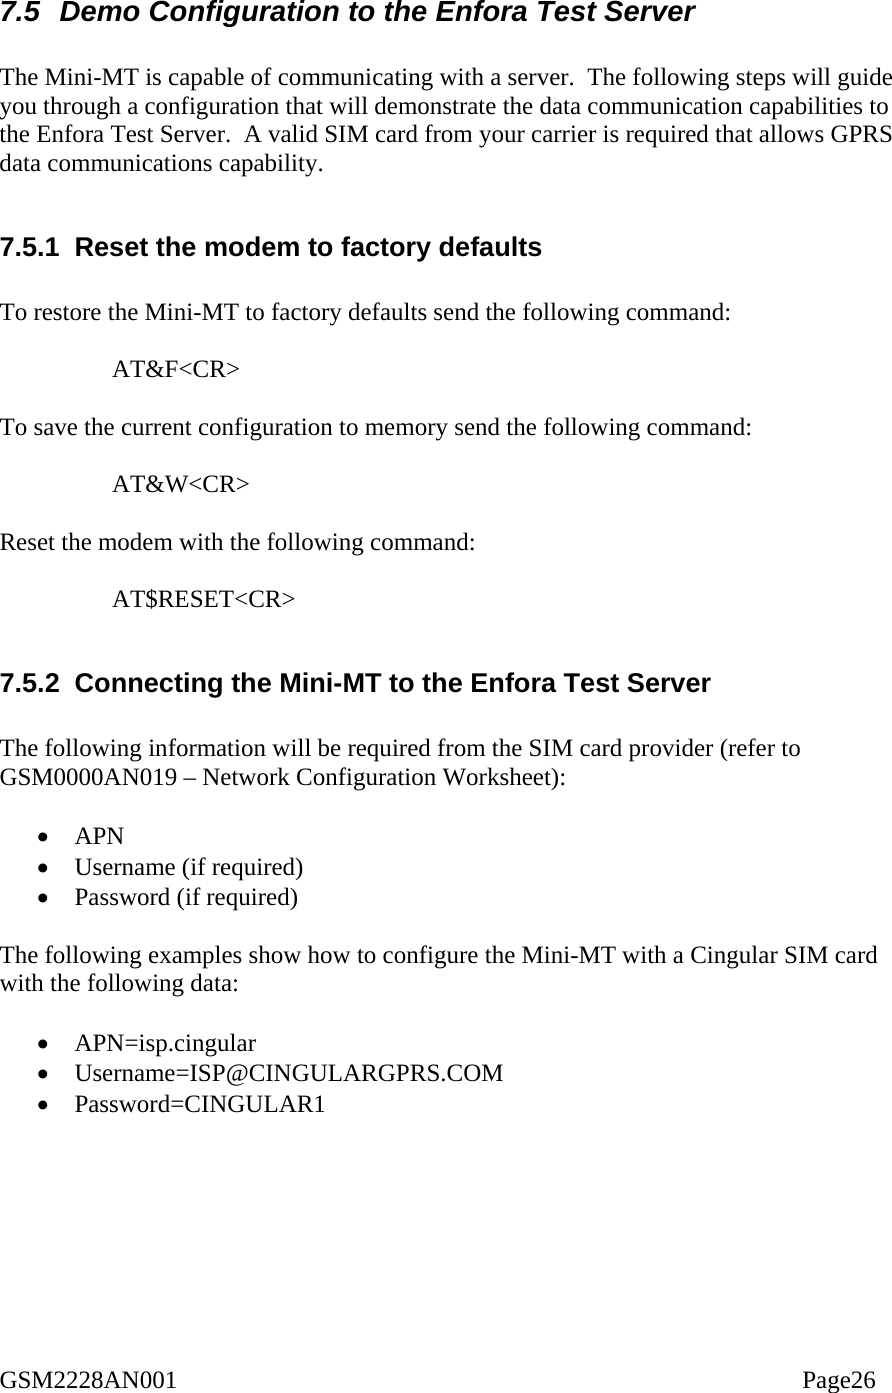  7.5  Demo Configuration to the Enfora Test Server  The Mini-MT is capable of communicating with a server.  The following steps will guide you through a configuration that will demonstrate the data communication capabilities to the Enfora Test Server.  A valid SIM card from your carrier is required that allows GPRS data communications capability.    7.5.1  Reset the modem to factory defaults  To restore the Mini-MT to factory defaults send the following command:  AT&amp;F&lt;CR&gt;  To save the current configuration to memory send the following command:  AT&amp;W&lt;CR&gt;  Reset the modem with the following command:  AT$RESET&lt;CR&gt;  7.5.2  Connecting the Mini-MT to the Enfora Test Server  The following information will be required from the SIM card provider (refer to GSM0000AN019 – Network Configuration Worksheet):  •  APN •  Username (if required) •  Password (if required)  The following examples show how to configure the Mini-MT with a Cingular SIM card with the following data:  •  APN=isp.cingular •  Username=ISP@CINGULARGPRS.COM •  Password=CINGULAR1  GSM2228AN001                                                                                                    Page26 